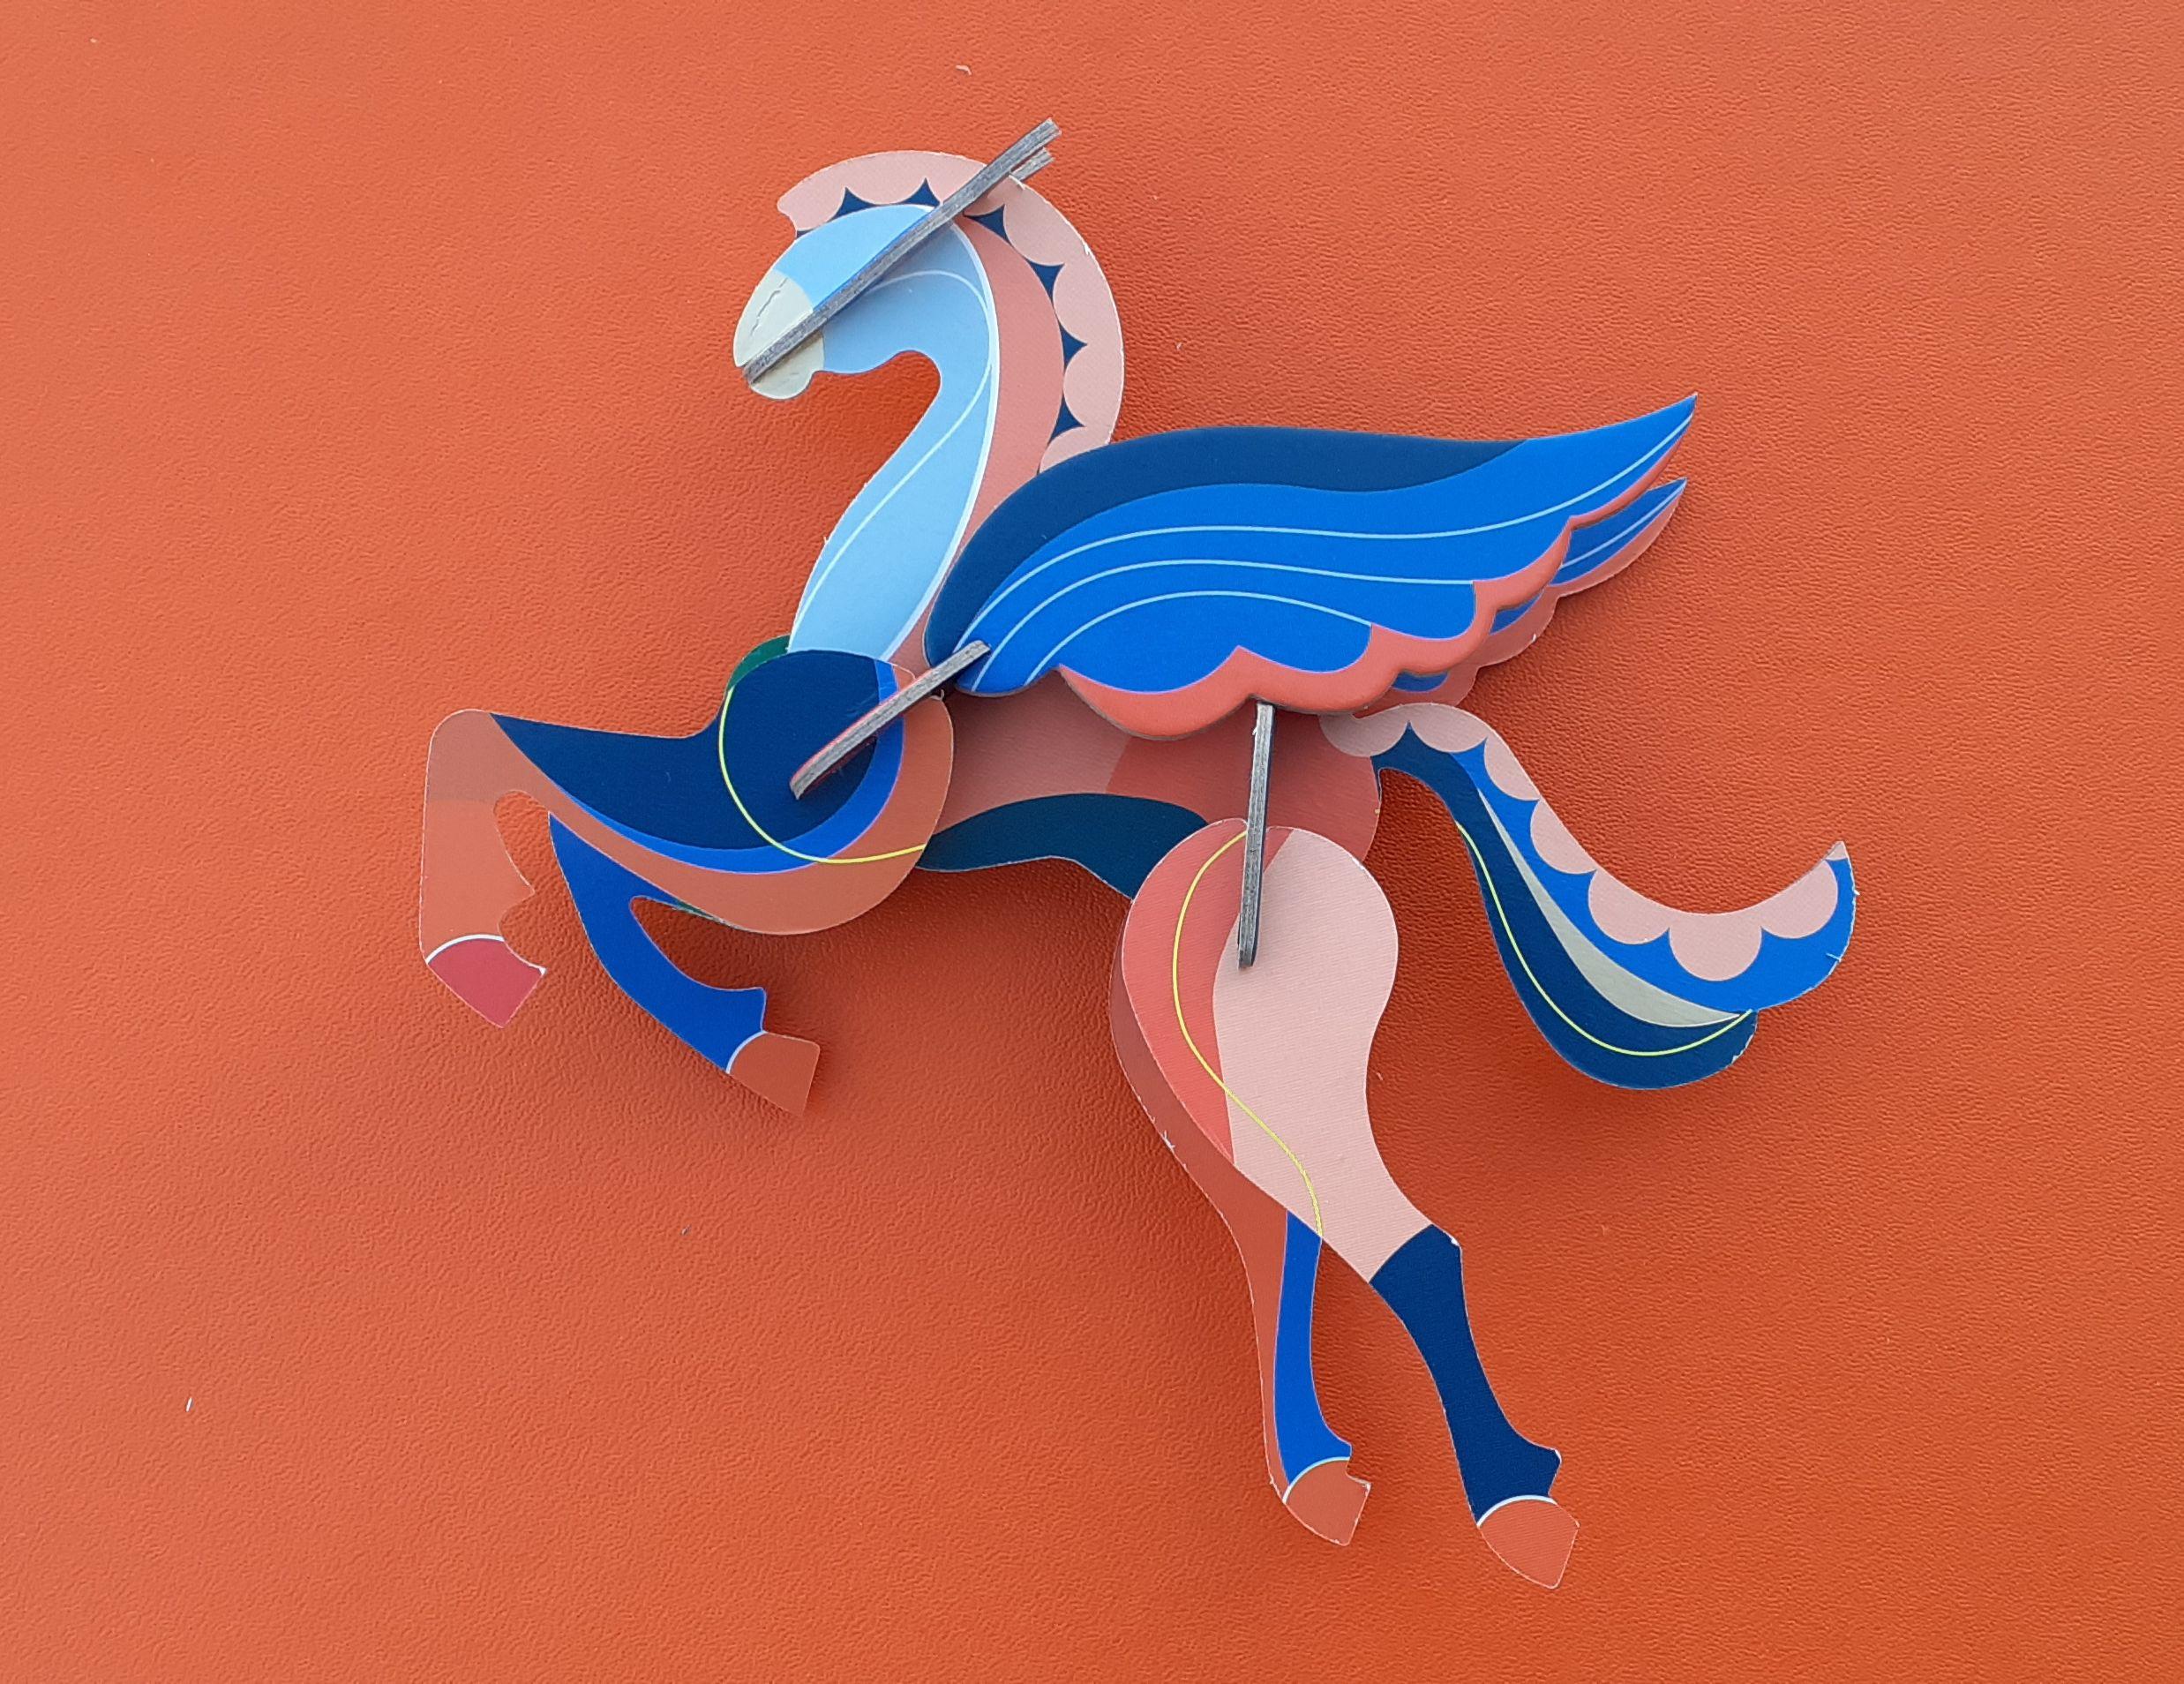 Hermès Pegasus Le Pégase Cheval Ailé Winged Horse in Cardboard to Hang For Sale 12